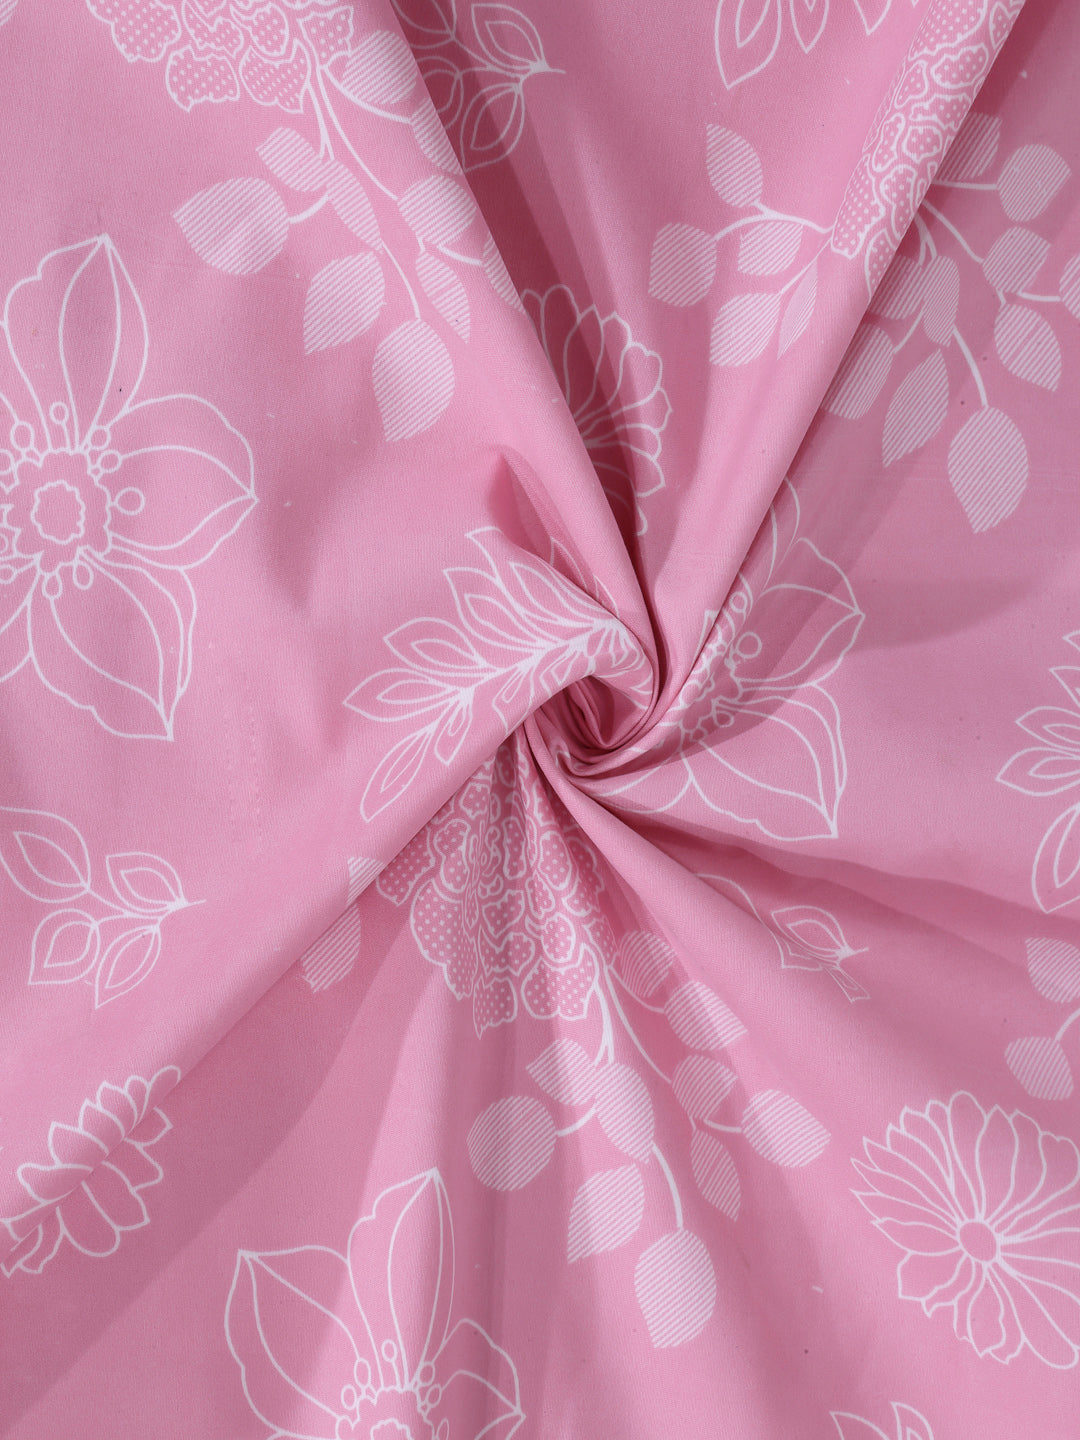 Arrabi Pink Floral TC Cotton Blend King Size Bookfold Bedsheet with 2 Pillow Covers (250 X 220 cm)